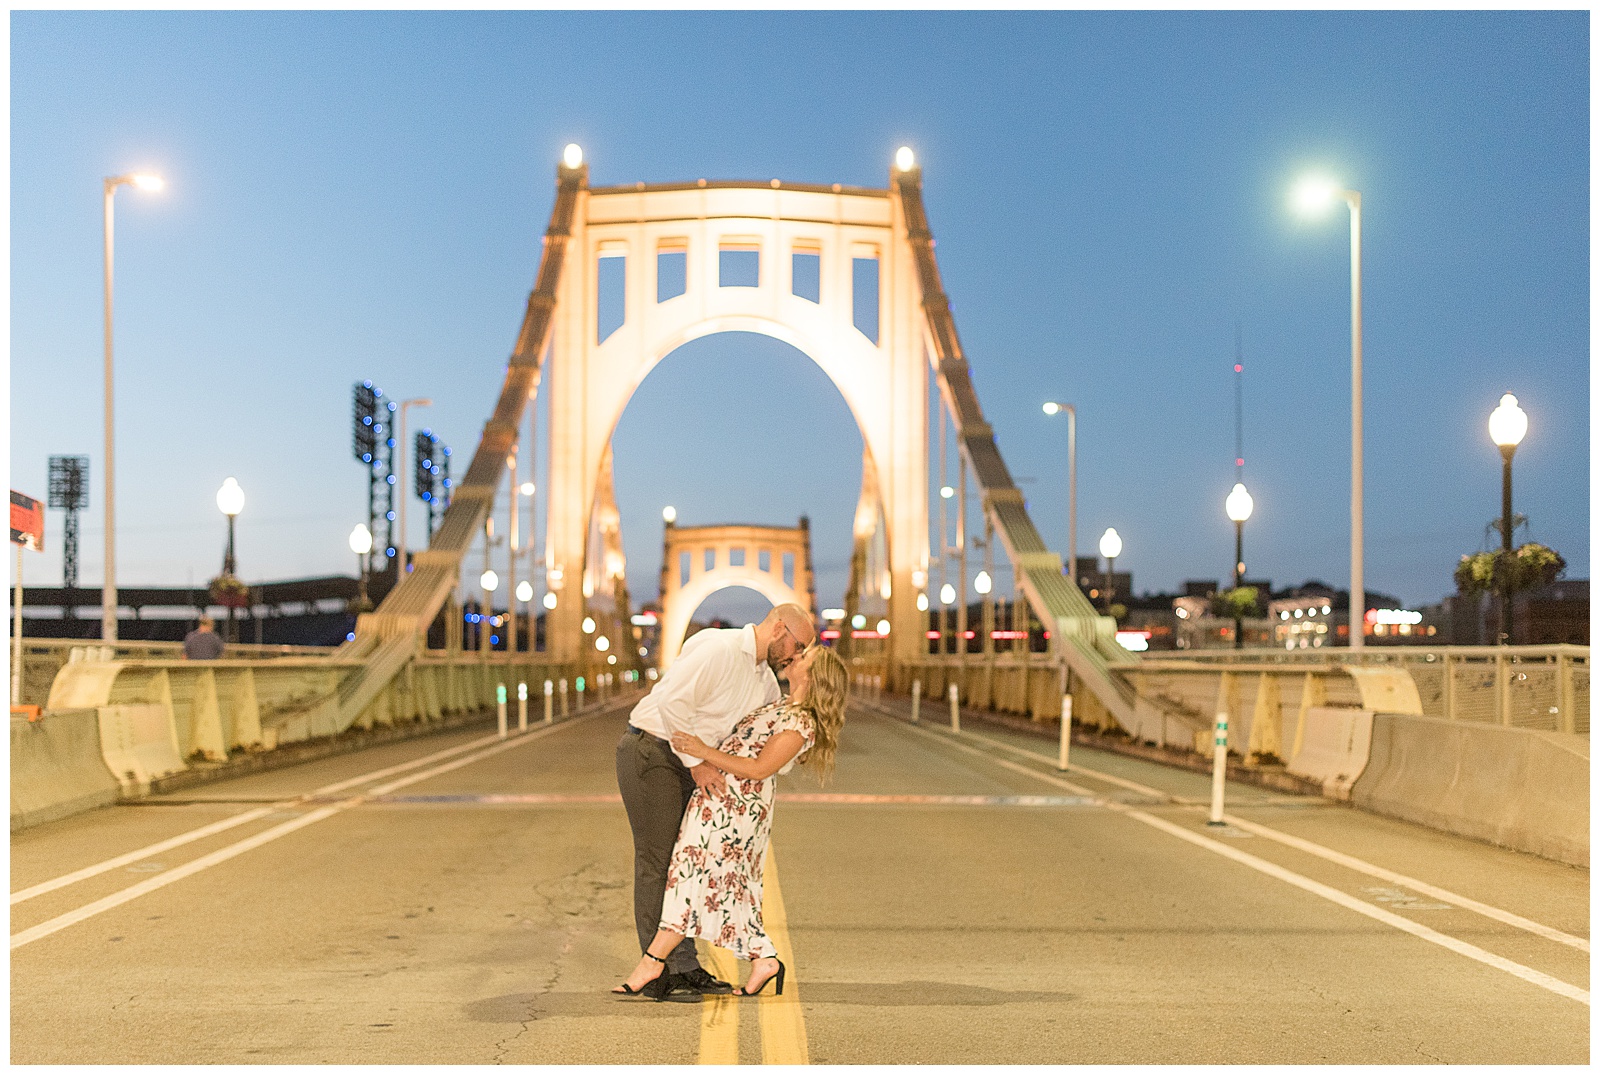 the couple is standing in the middle of the road at dusk with a lit-up arching bridge and streetlights behind them and the guy is on the left dipping the girl backwards and holding her as they kiss and her left foot reaches out to point towards the ground in downtown Pittsburgh